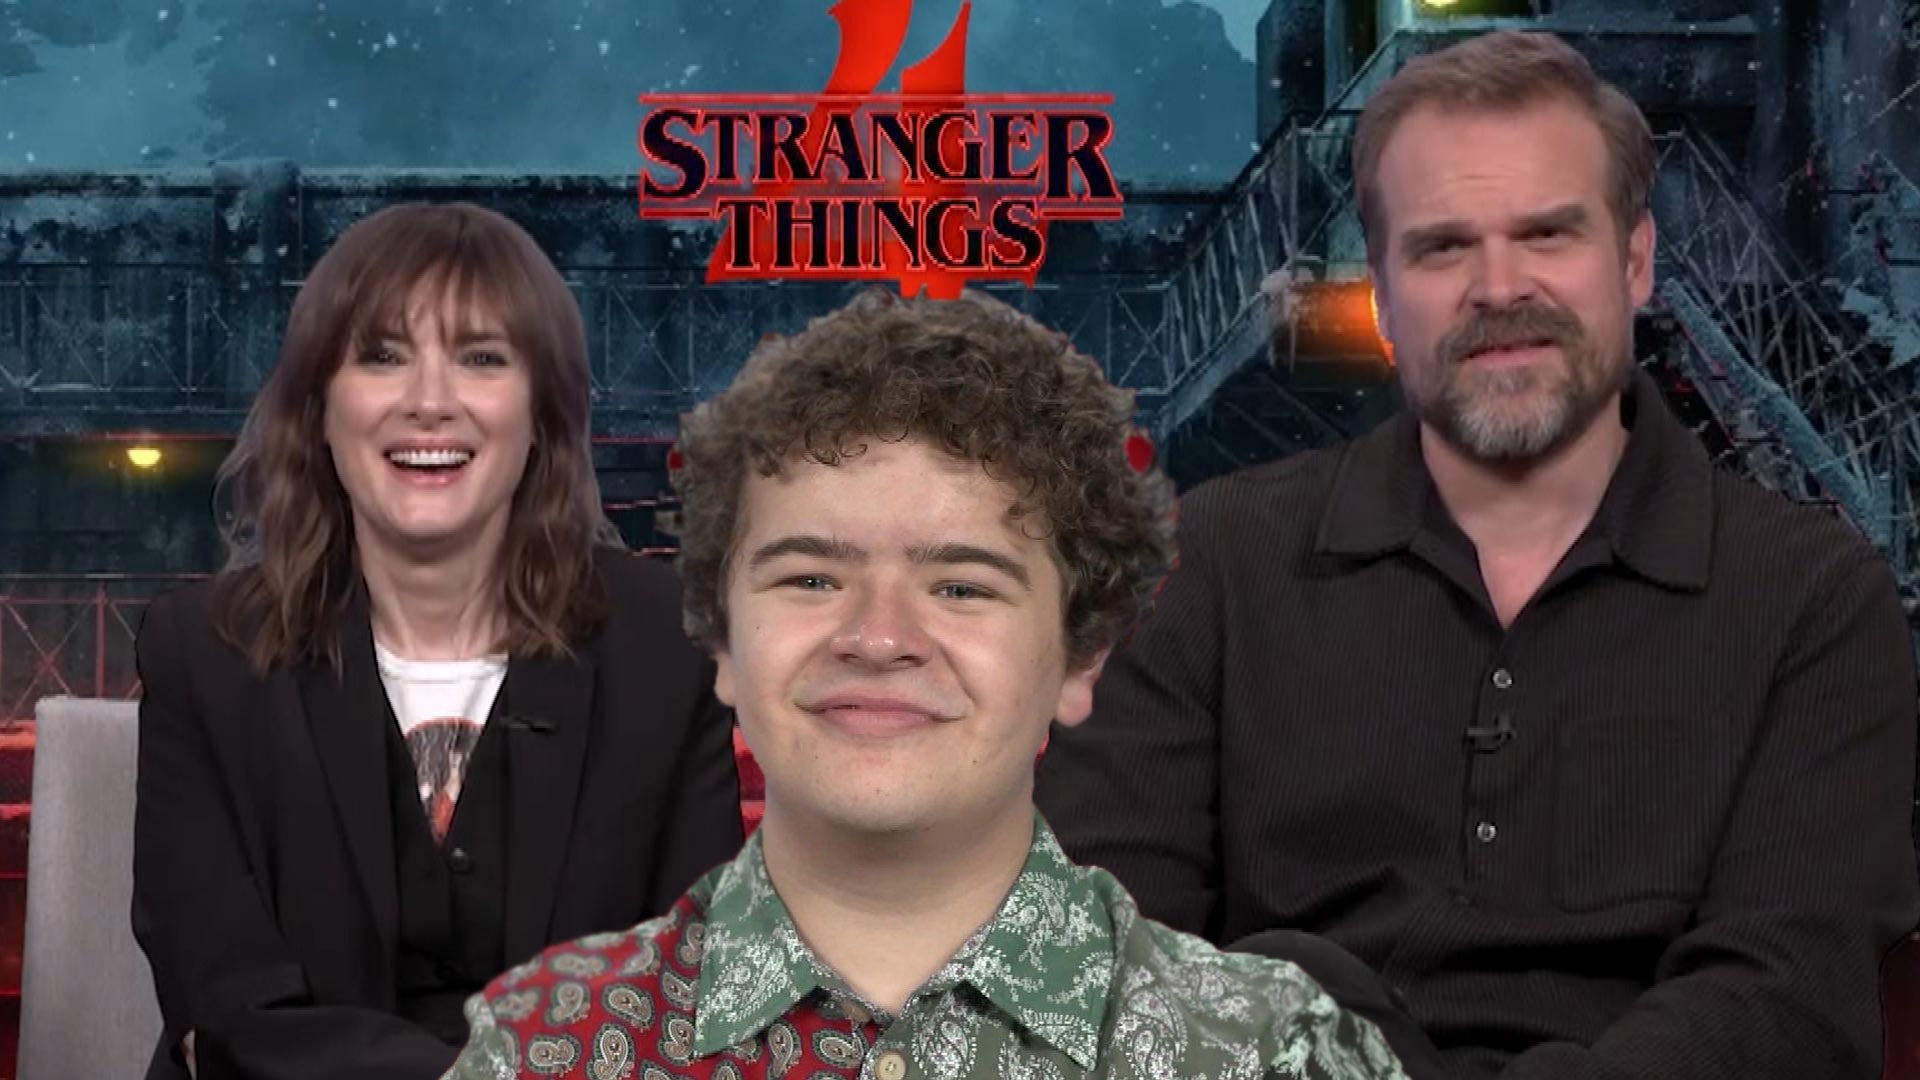 ‘Stranger Things’ Cast Says 4th and Final Season Is ‘Driven by Love and Survival’ (Exclusive)